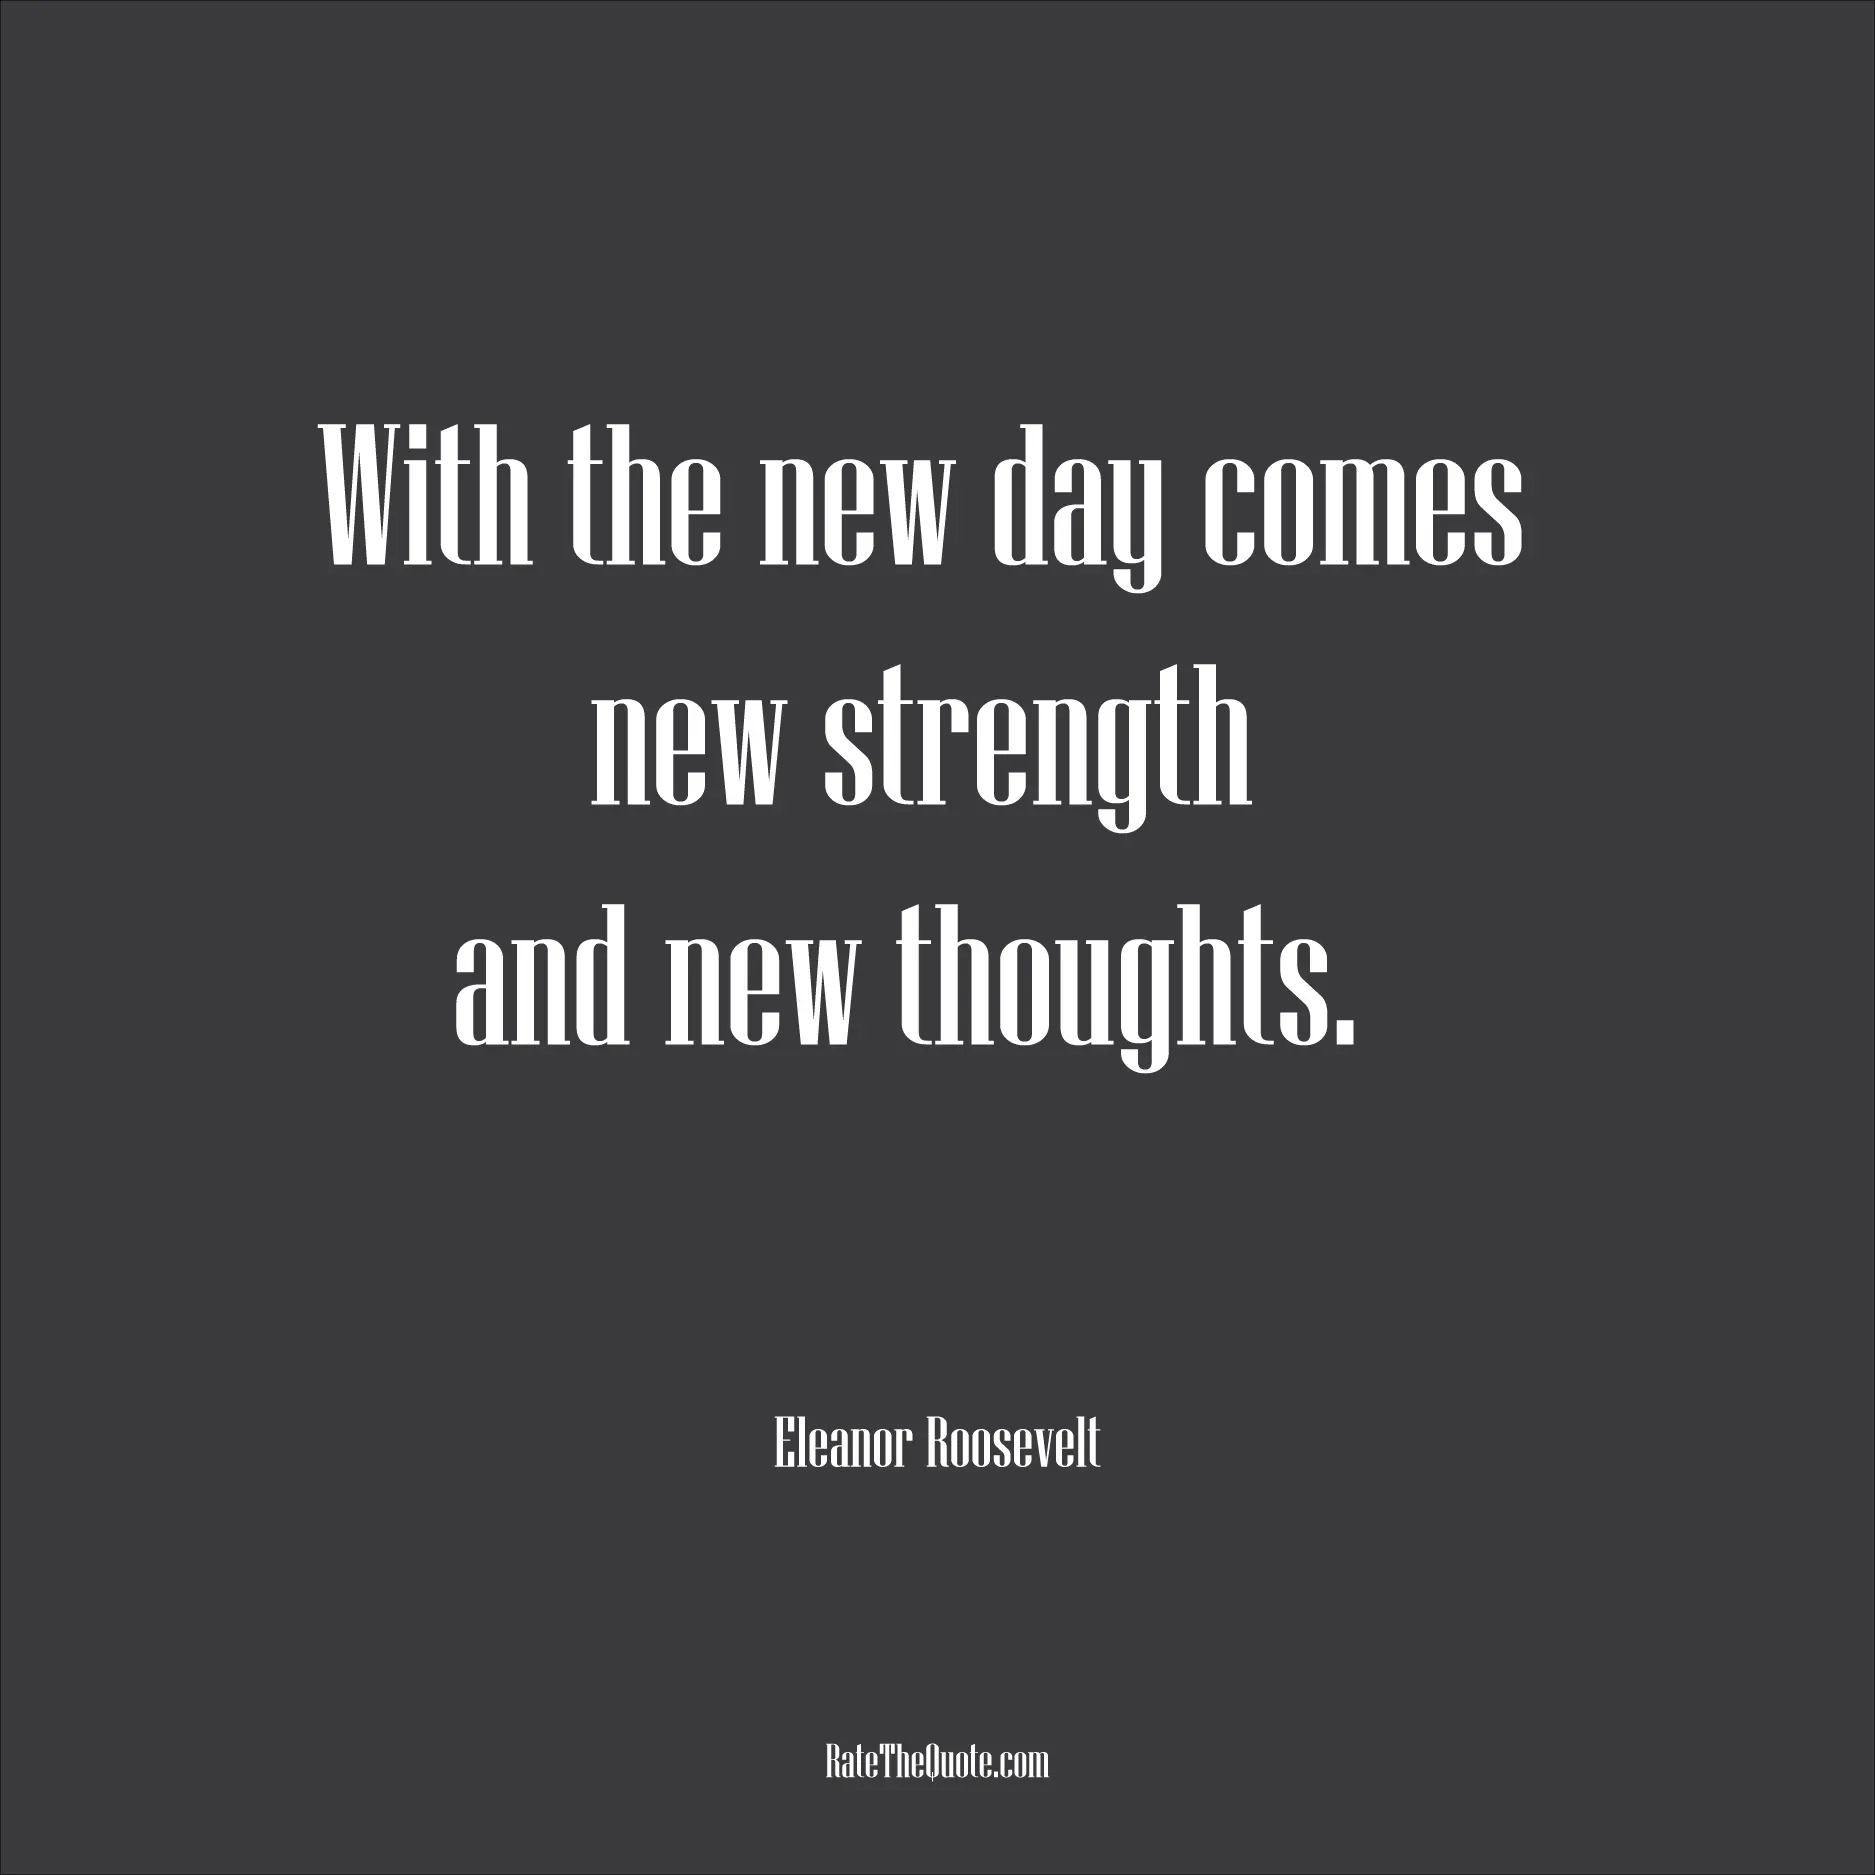 Motivational Quotes With the new day comes new strength and new thoughts. Eleanor Roosevelt